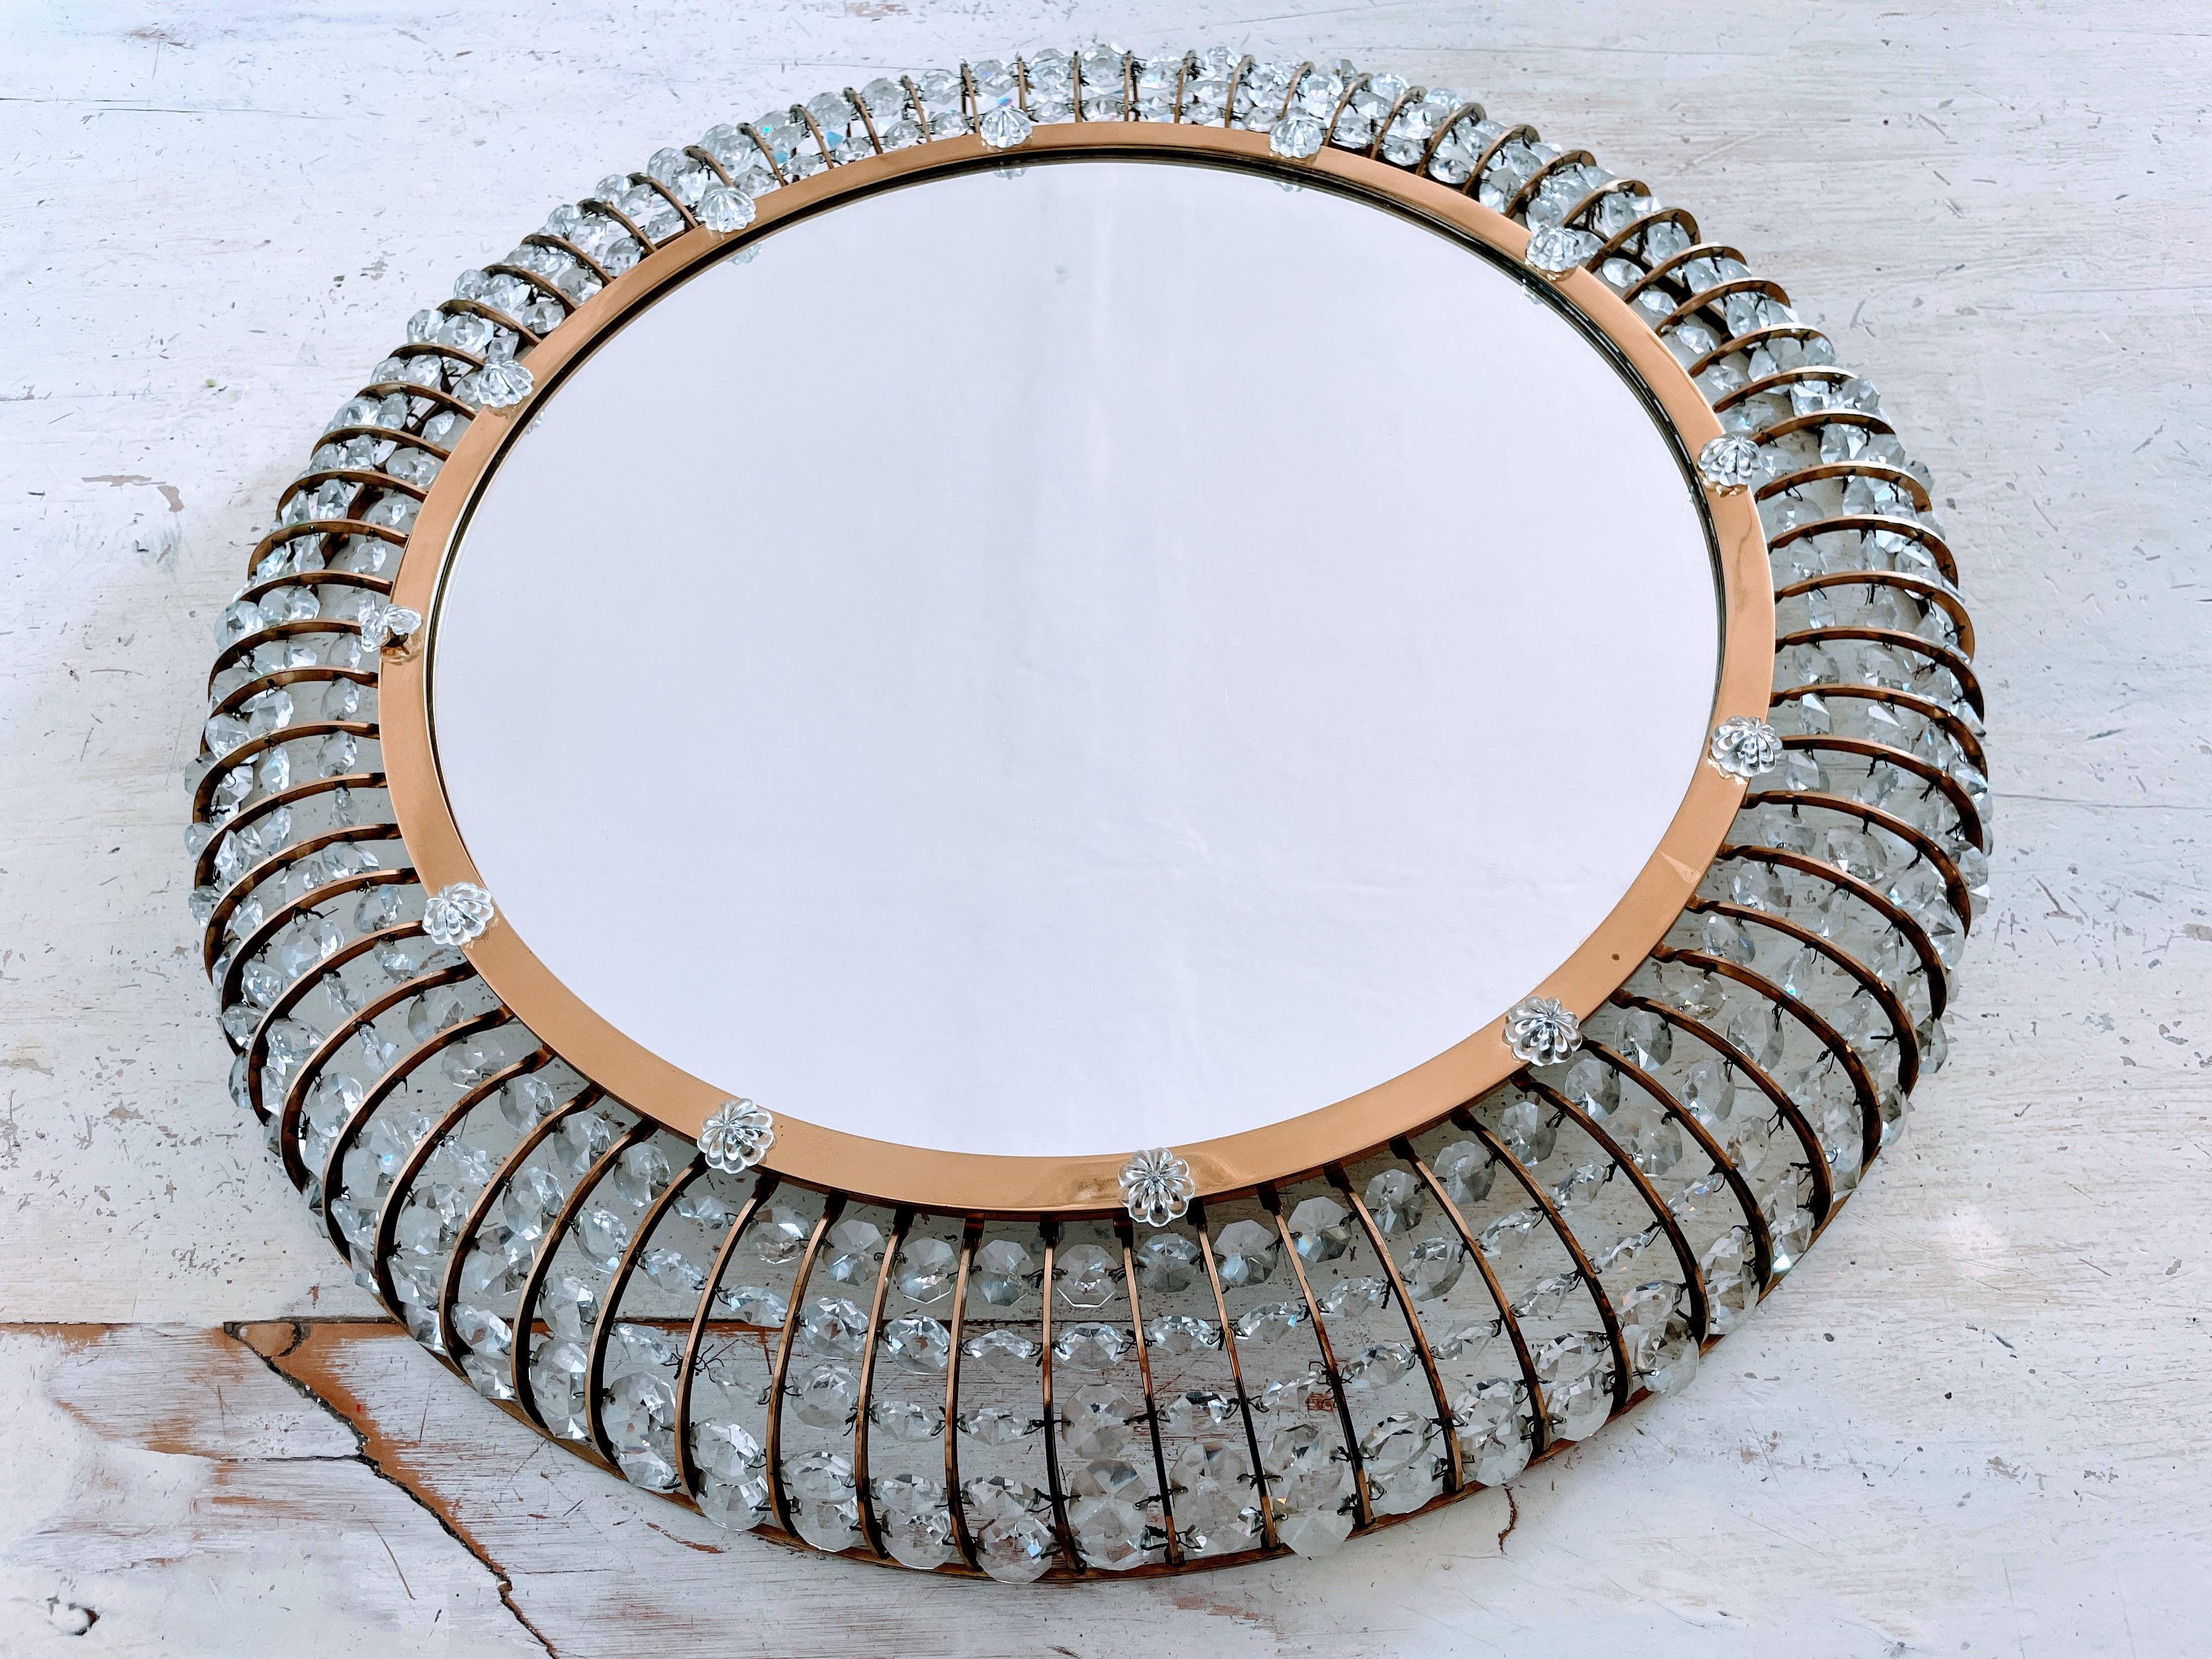 Introducing the Austrian mirror in the captivating style of Emil Stejnar – a mid-century masterpiece that seamlessly blends elegance and vintage charm. This round glass mirror, with a distinct convex shape reminiscent of backlit mirrors, showcases